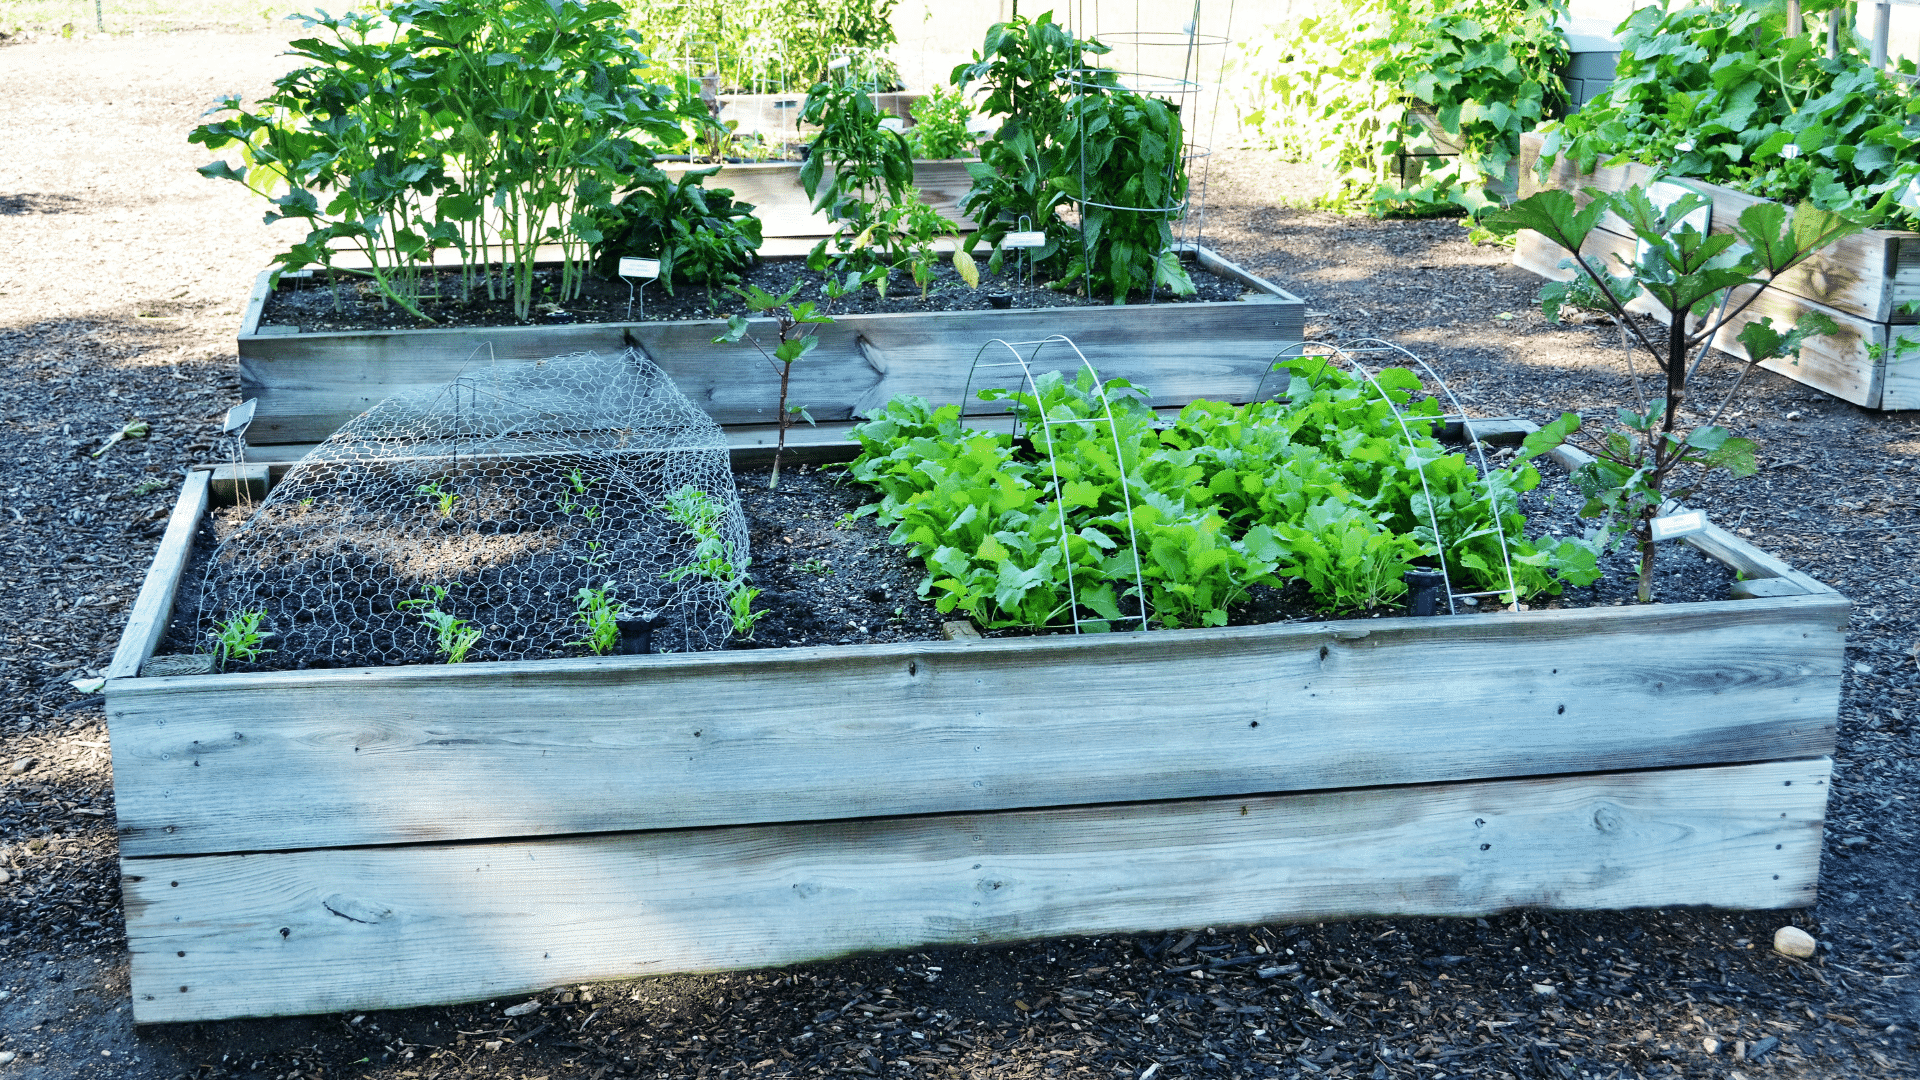 The Best 14 Types Of Wood For Making Garden Beds